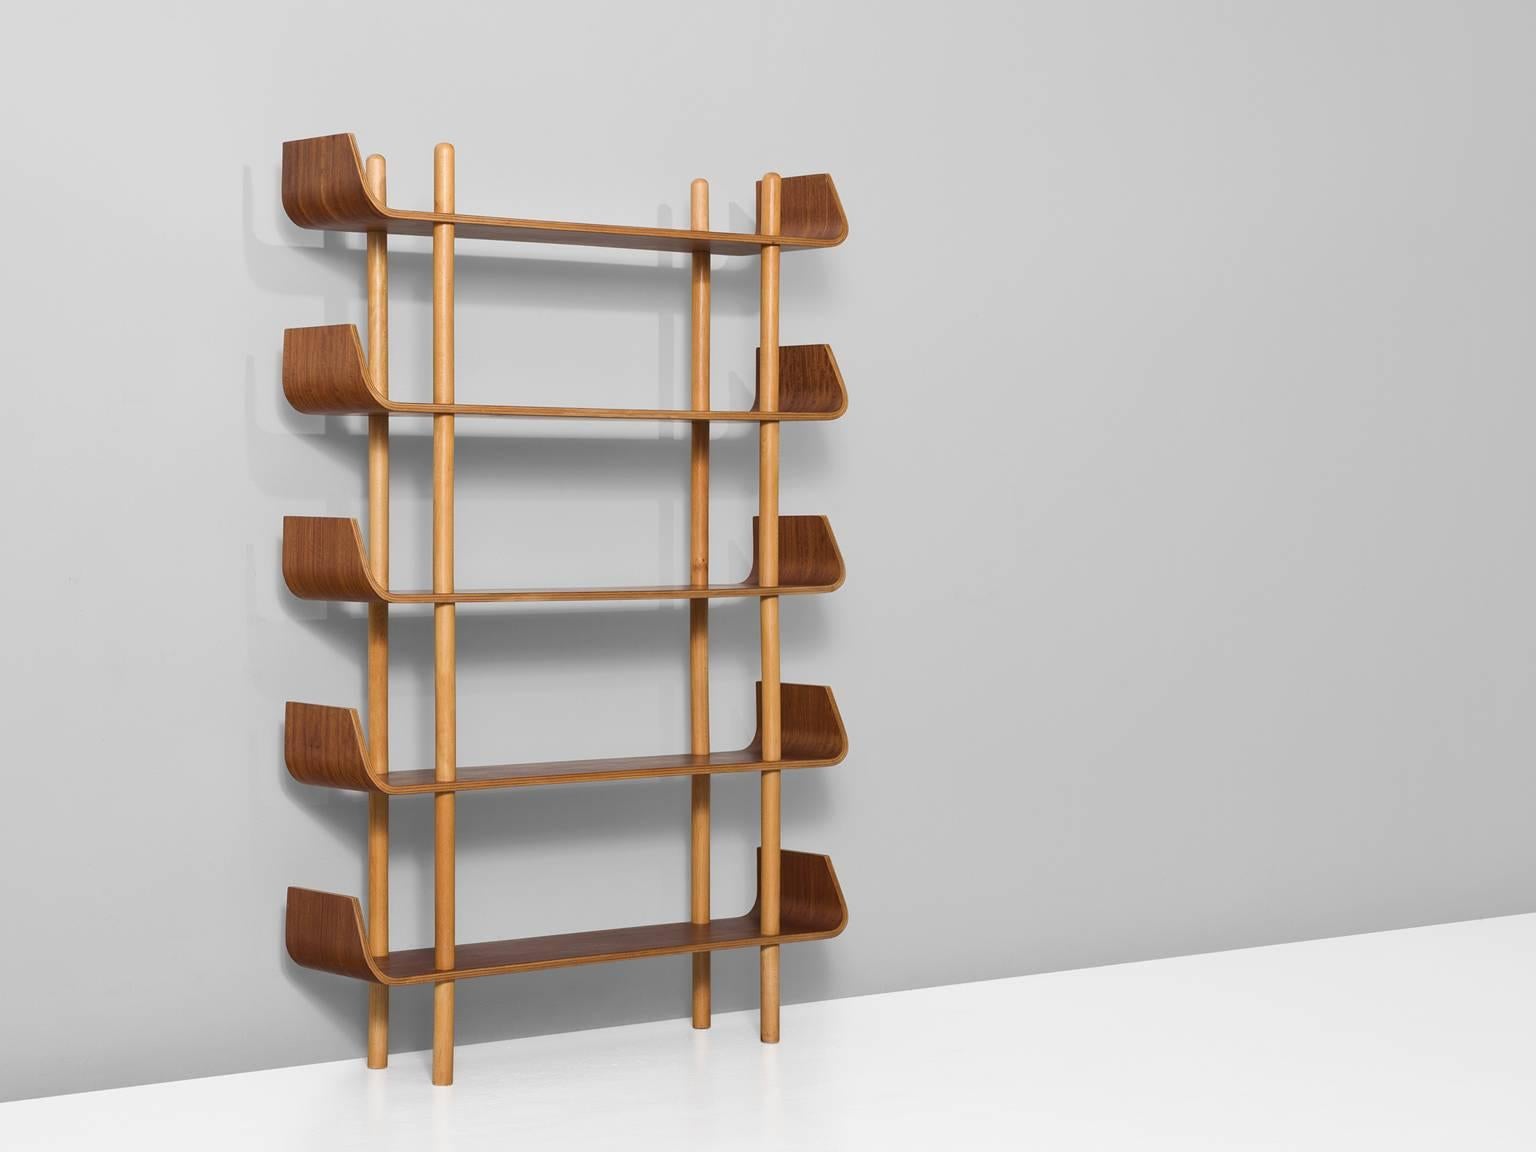 Bookcase, in teak and beech, by Willem Lutjens for Den Boer Gouda, the Netherlands, circa 1953. 

Bookcase with six shelves in teak plywood. Each shelve has curved ends, characteristic for this design by Lutjens. Hold together by four blond